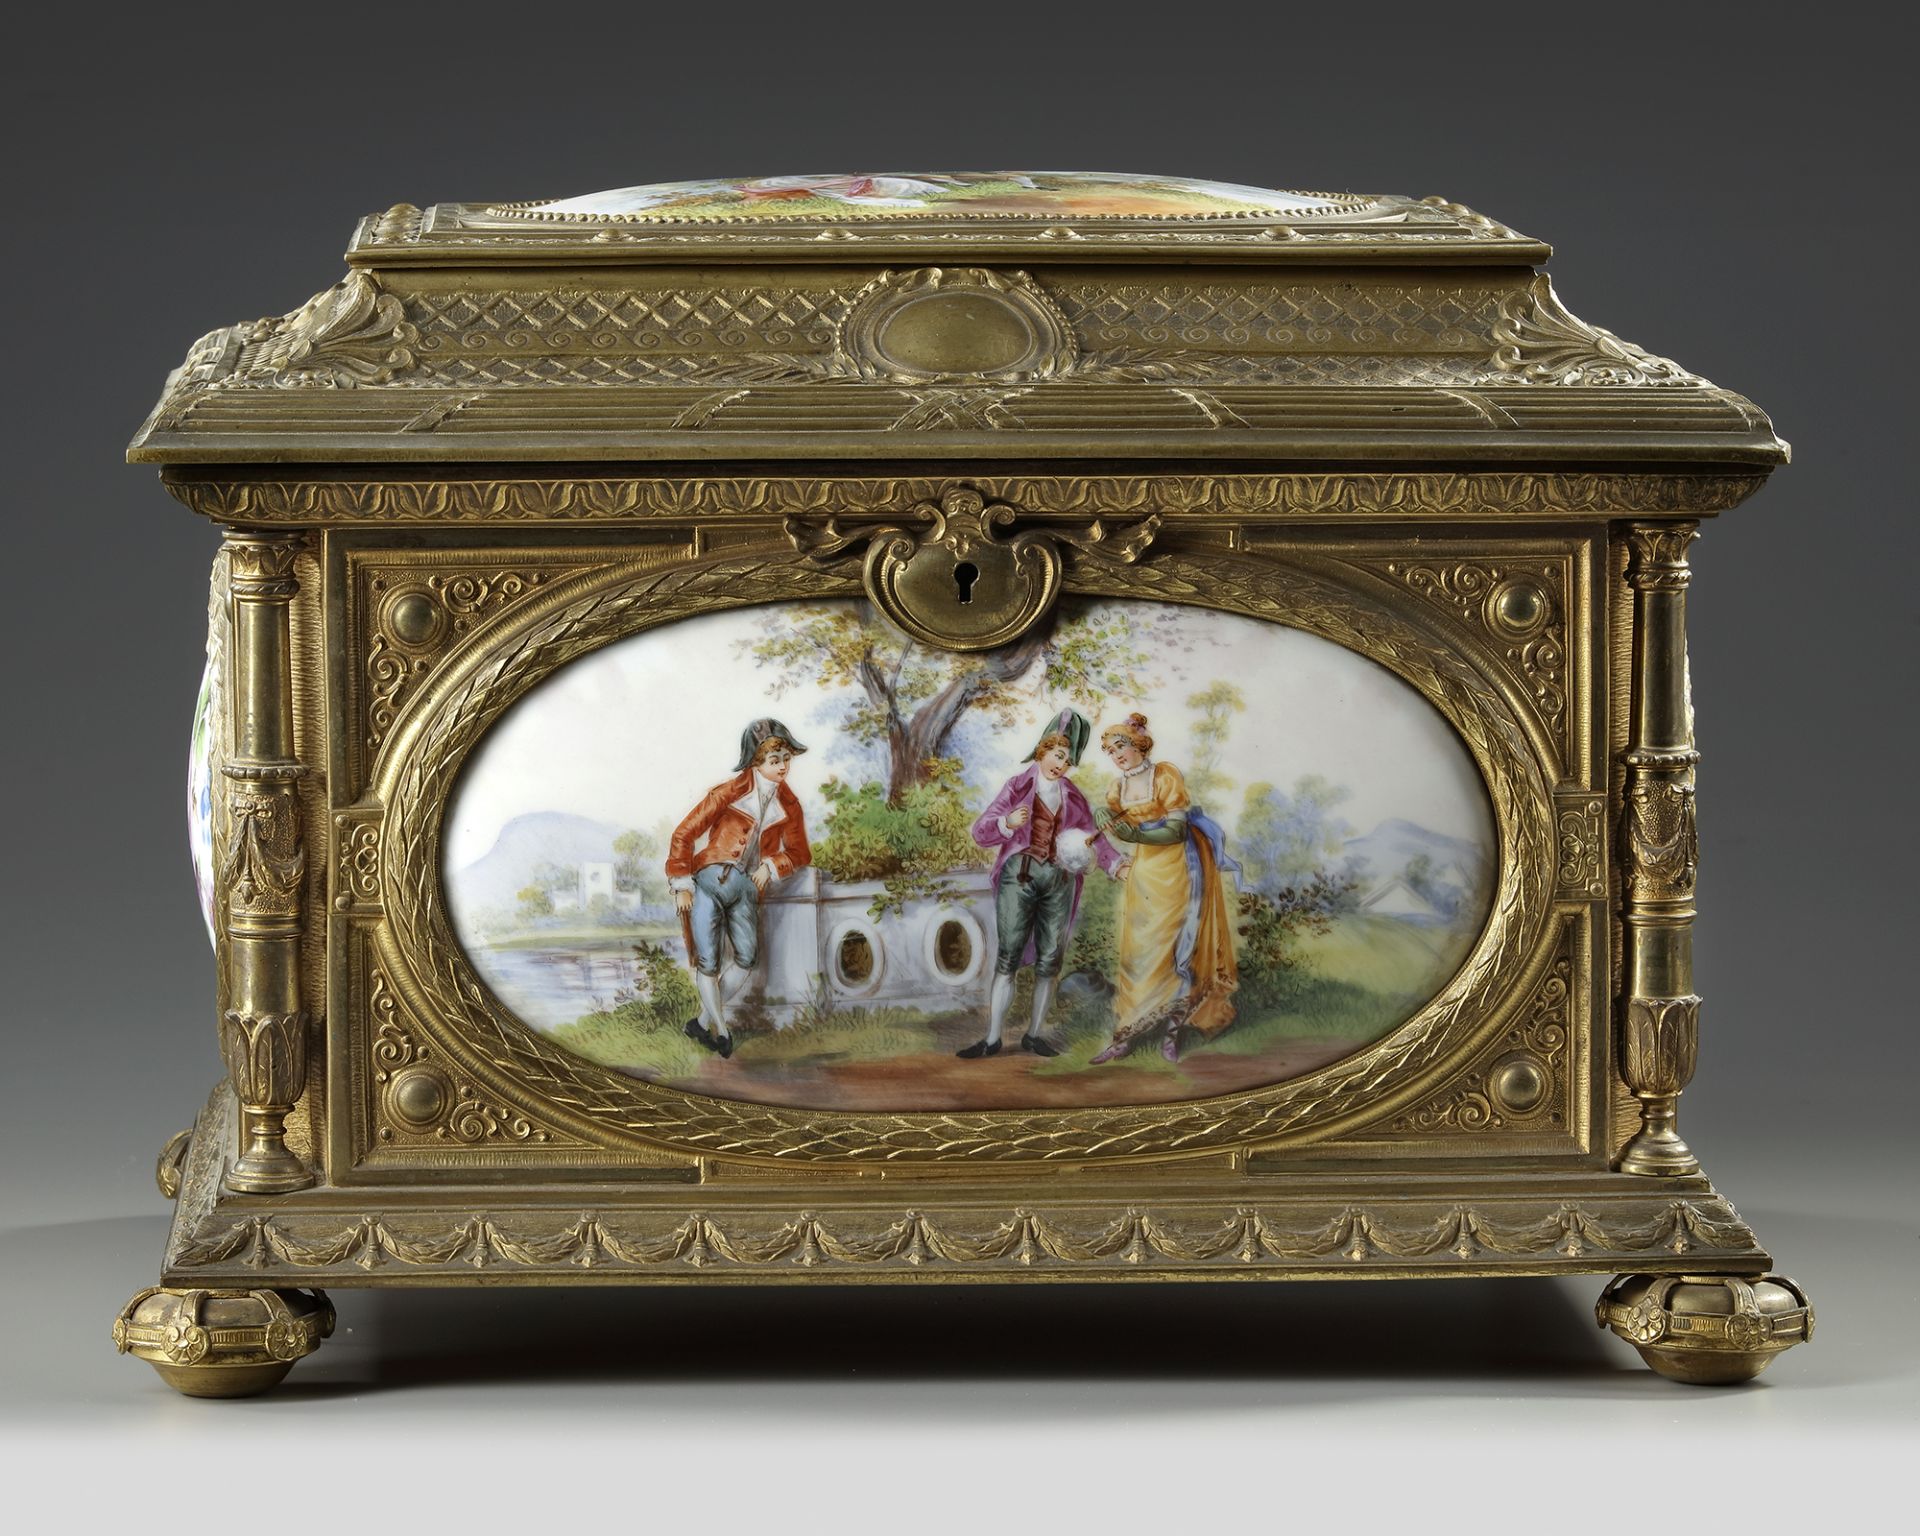 A LARGE JEWELRY BOX, SEVRES PORCELAIN, 19TH CENTURY - Image 4 of 5